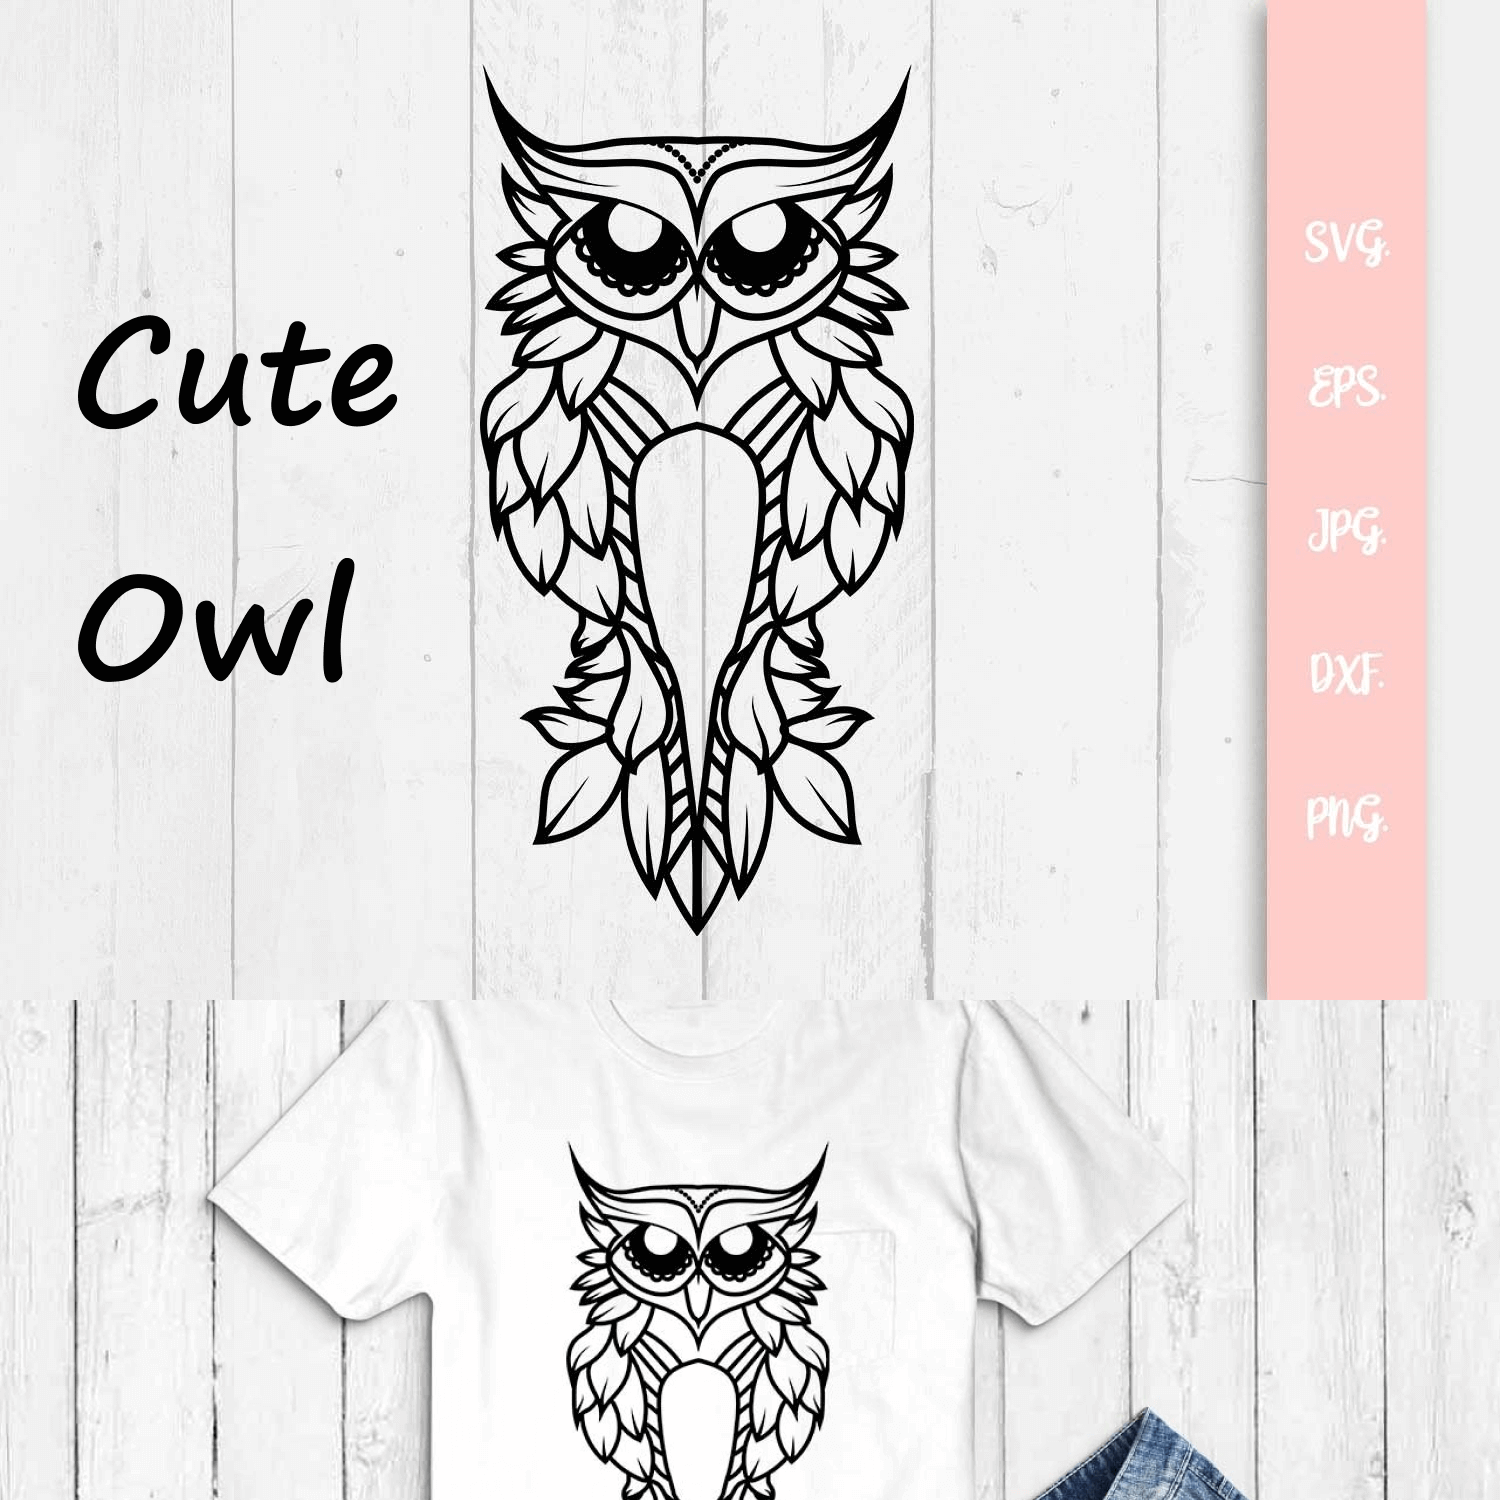 Cute Owl on the White Background.